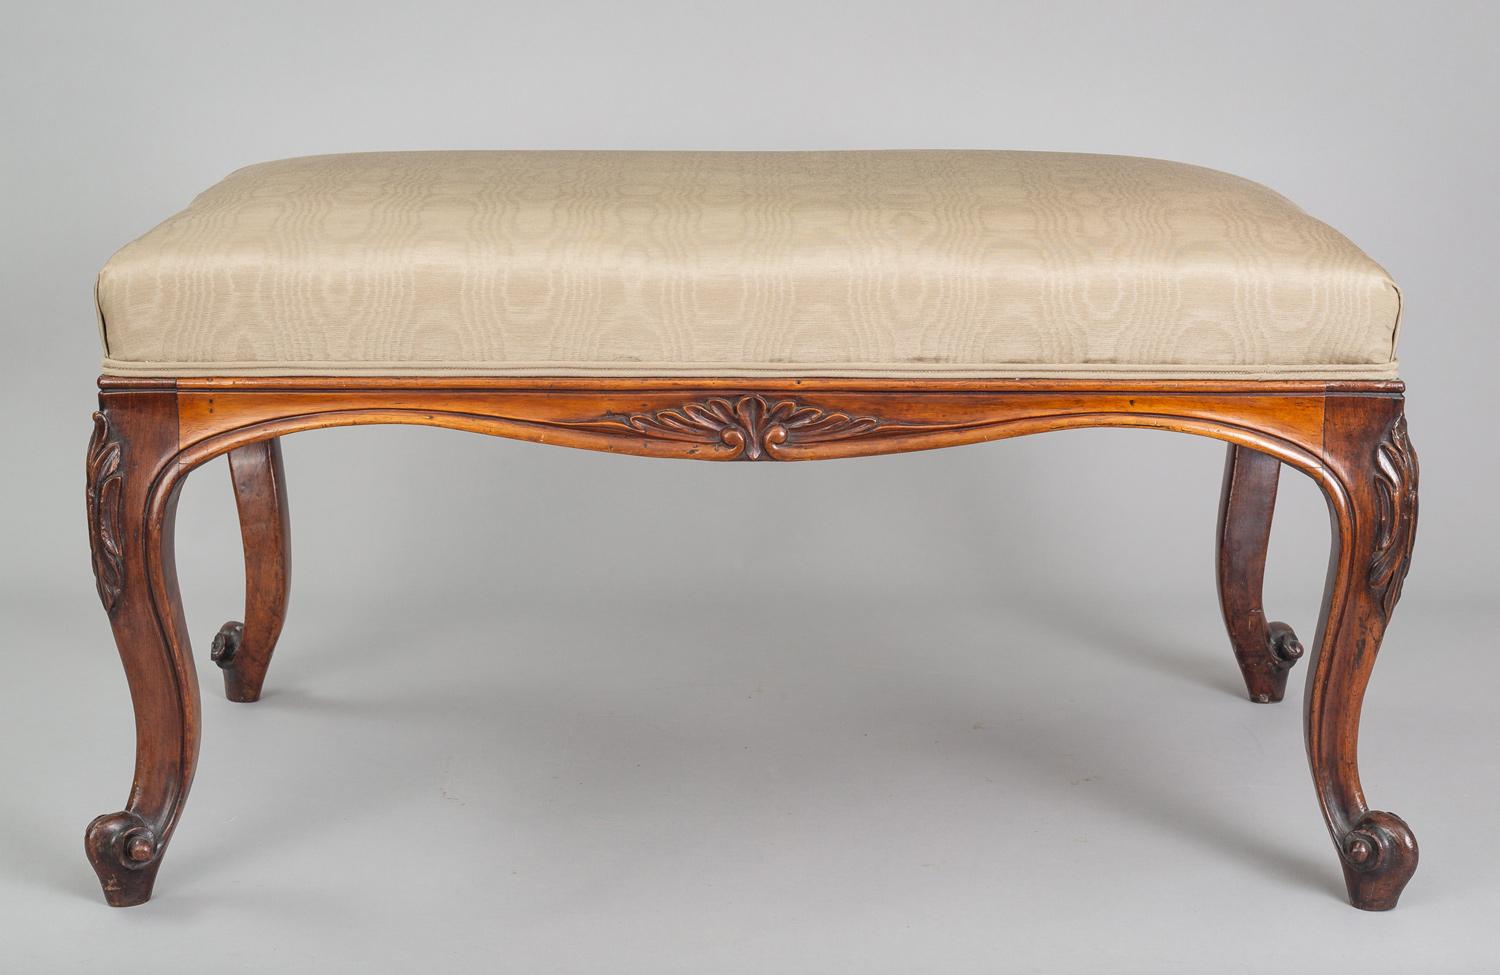 Carved rosewood bench with cabriole legs ending in French scroll feet. Upholstered in pale green silk moire.